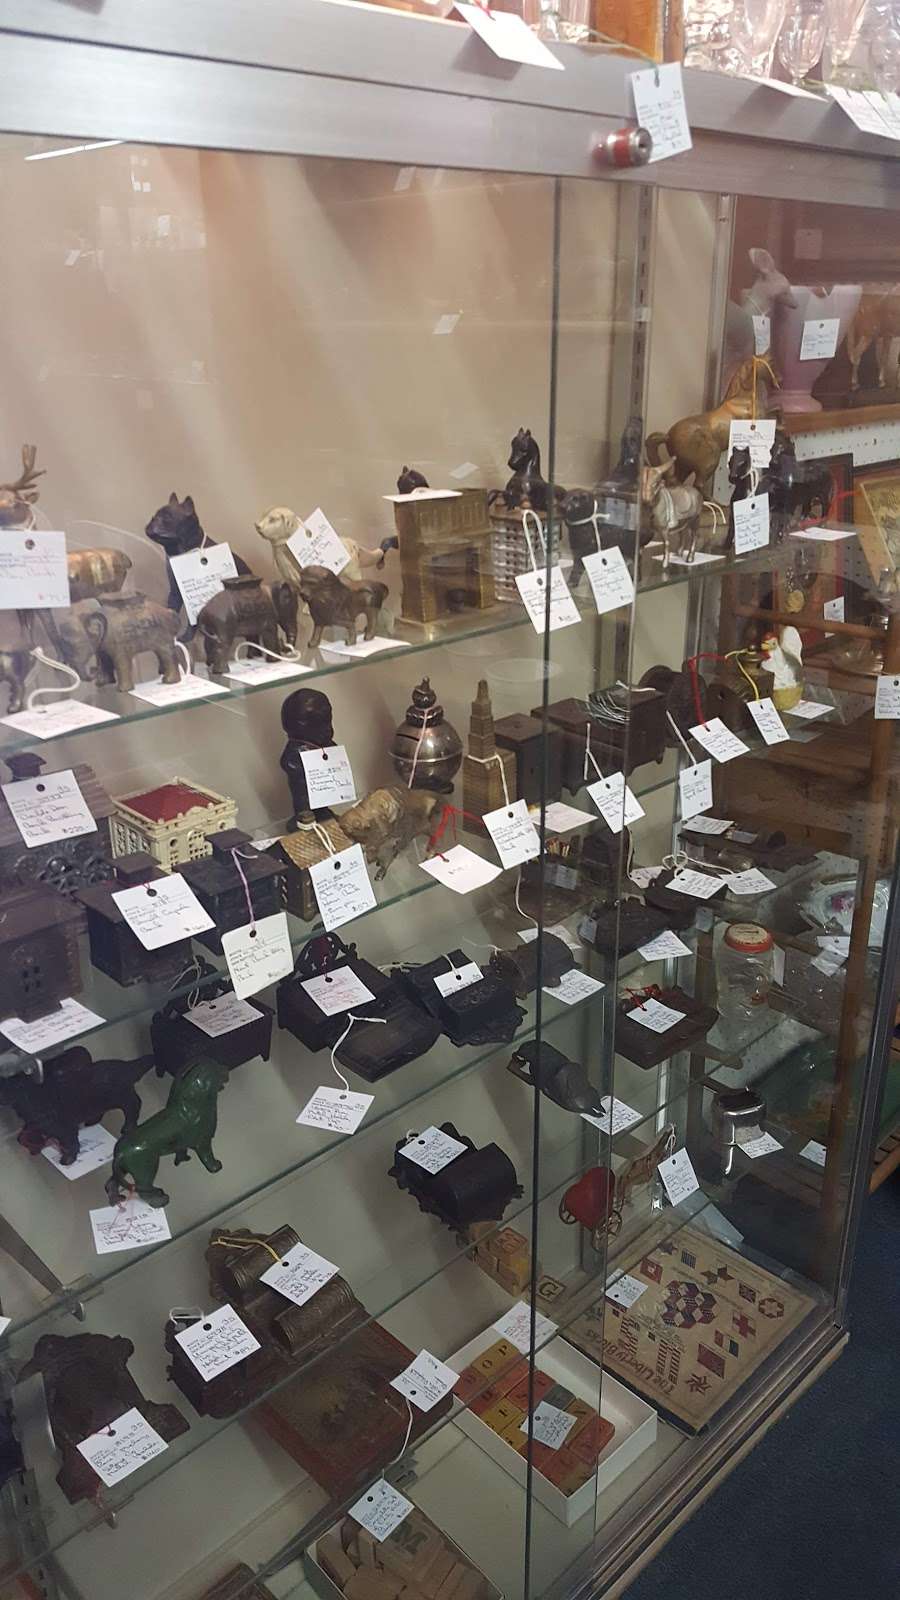 W D Pickers Antique Mall | 16095 371 Hwy, Platte City, MO 64079, USA | Phone: (816) 858-3100